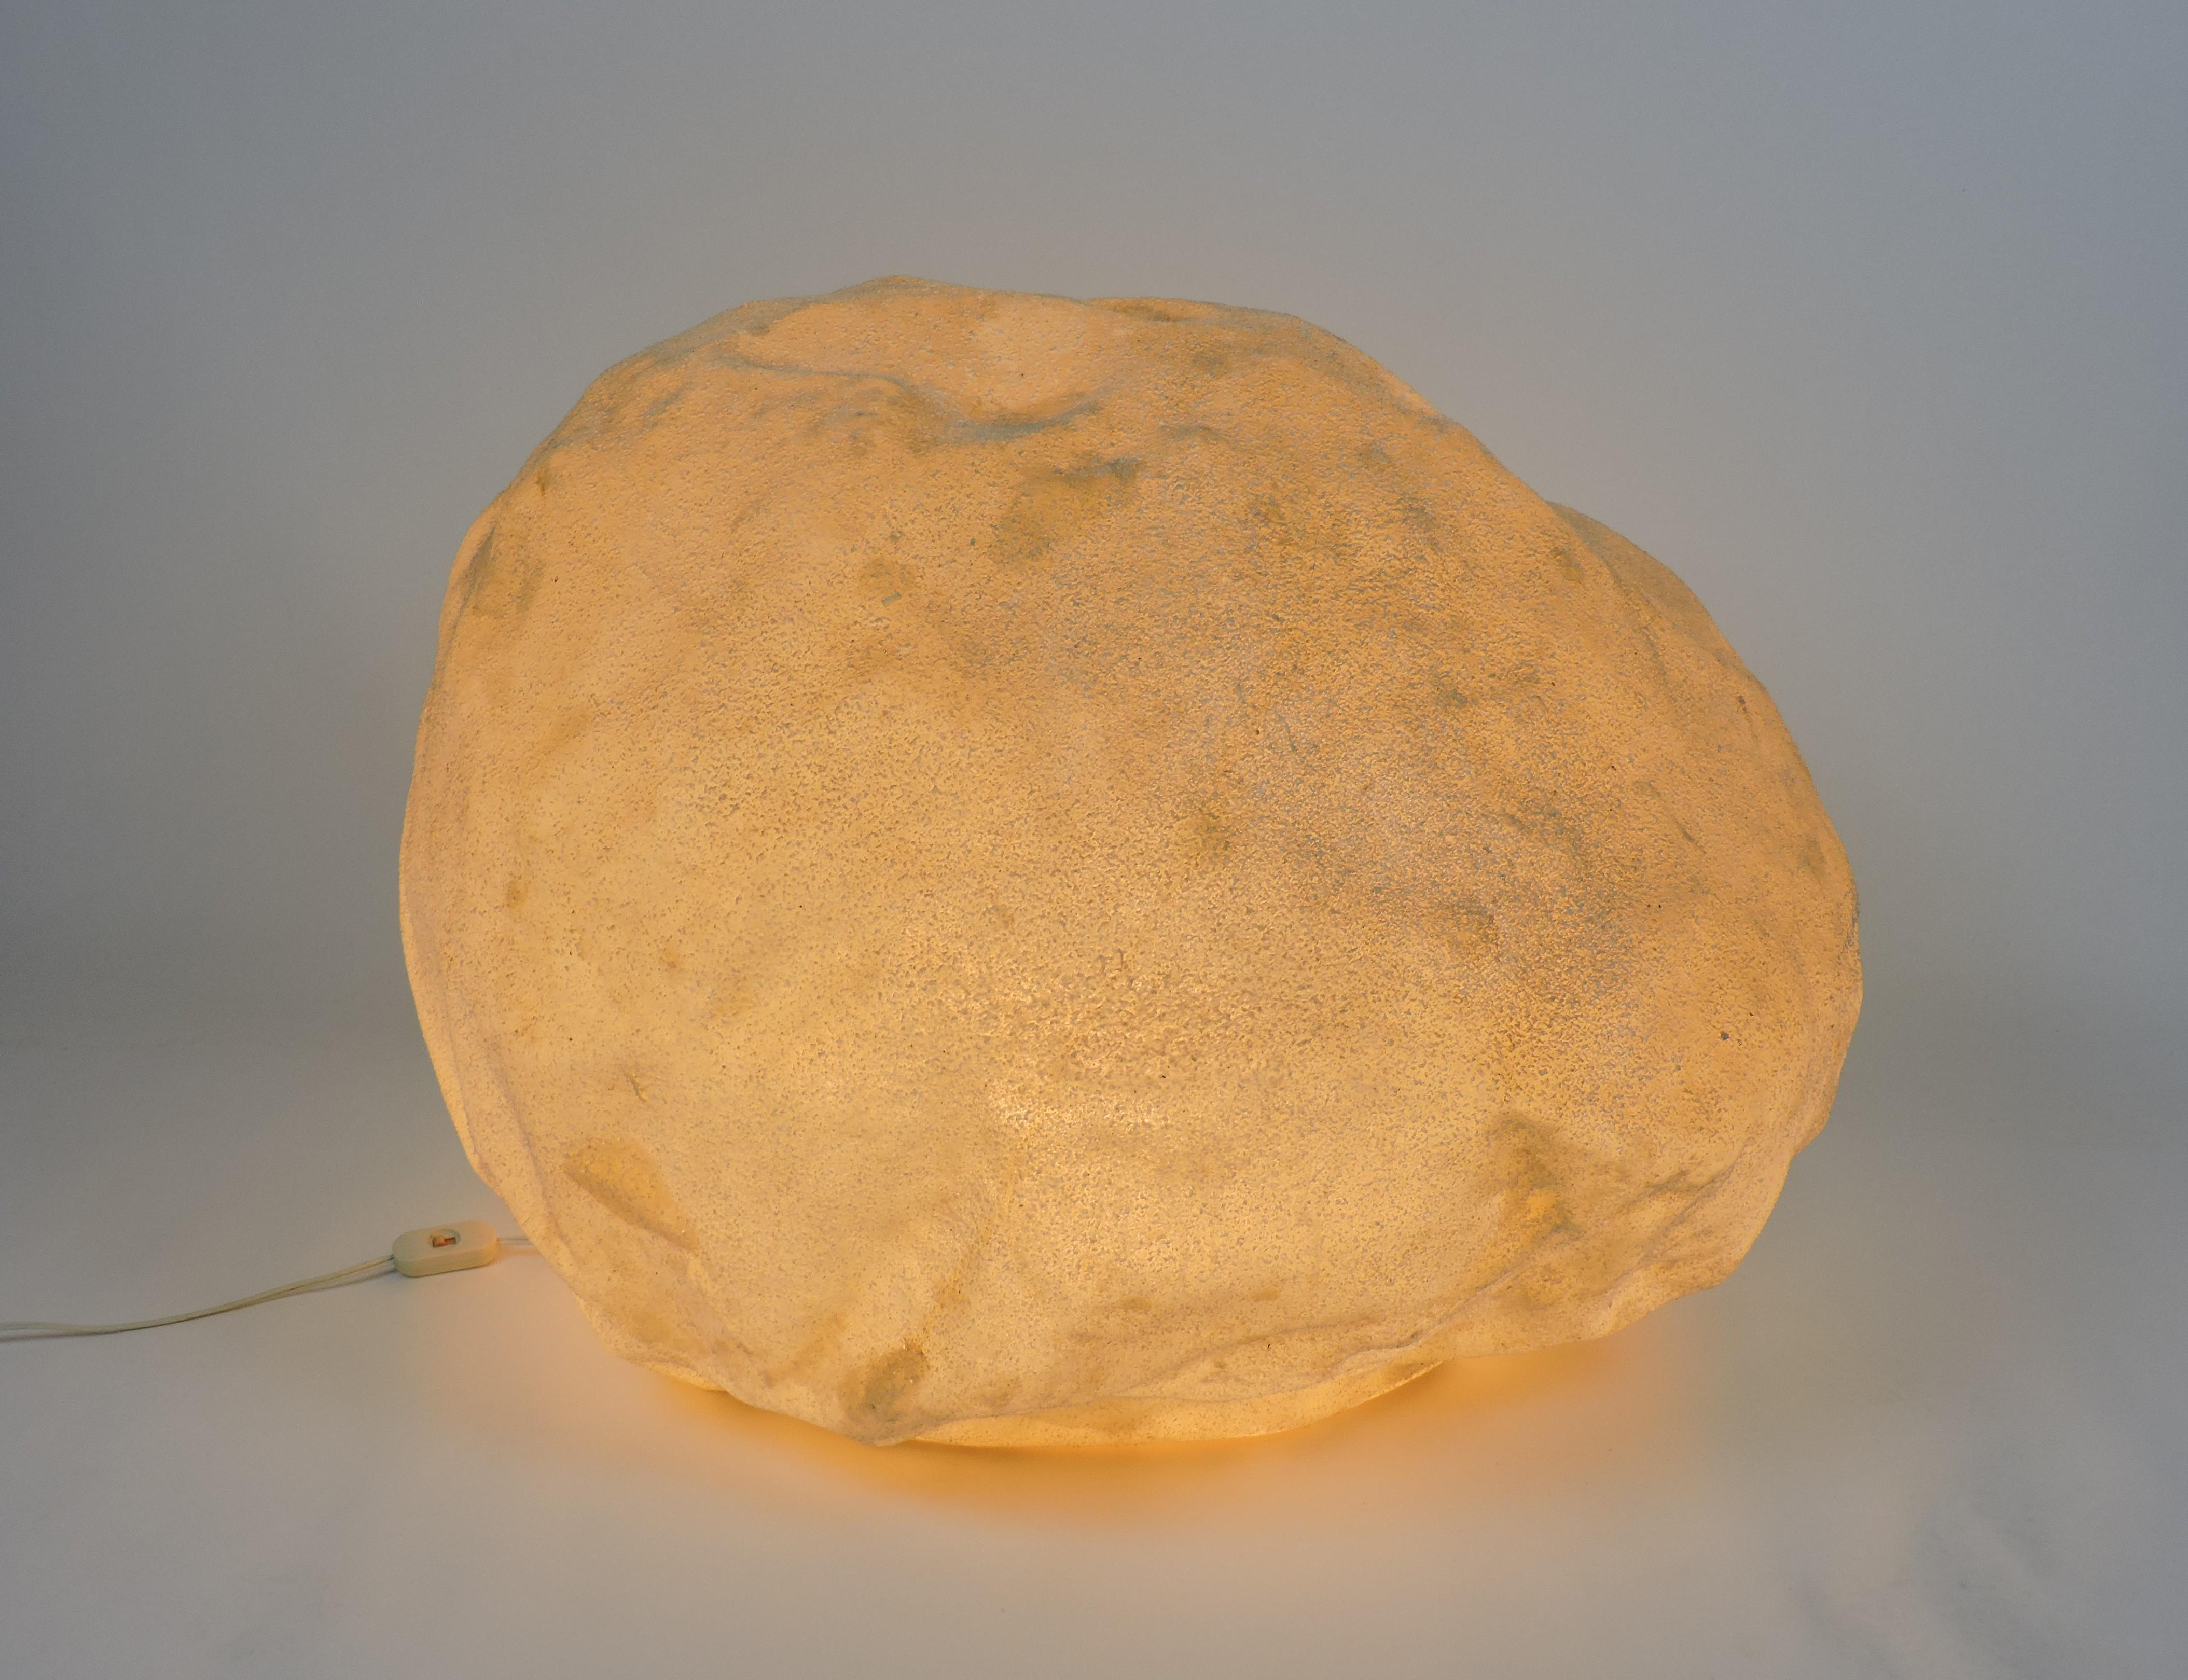 Very cool luminescent moon rock designed by Andre Cazenave and manufactured in Italy by Singleton in the 1970s. This lamp is made of translucent resin with marble powder inclusions and glows with a soft ambient light when lit. Very hard to find,